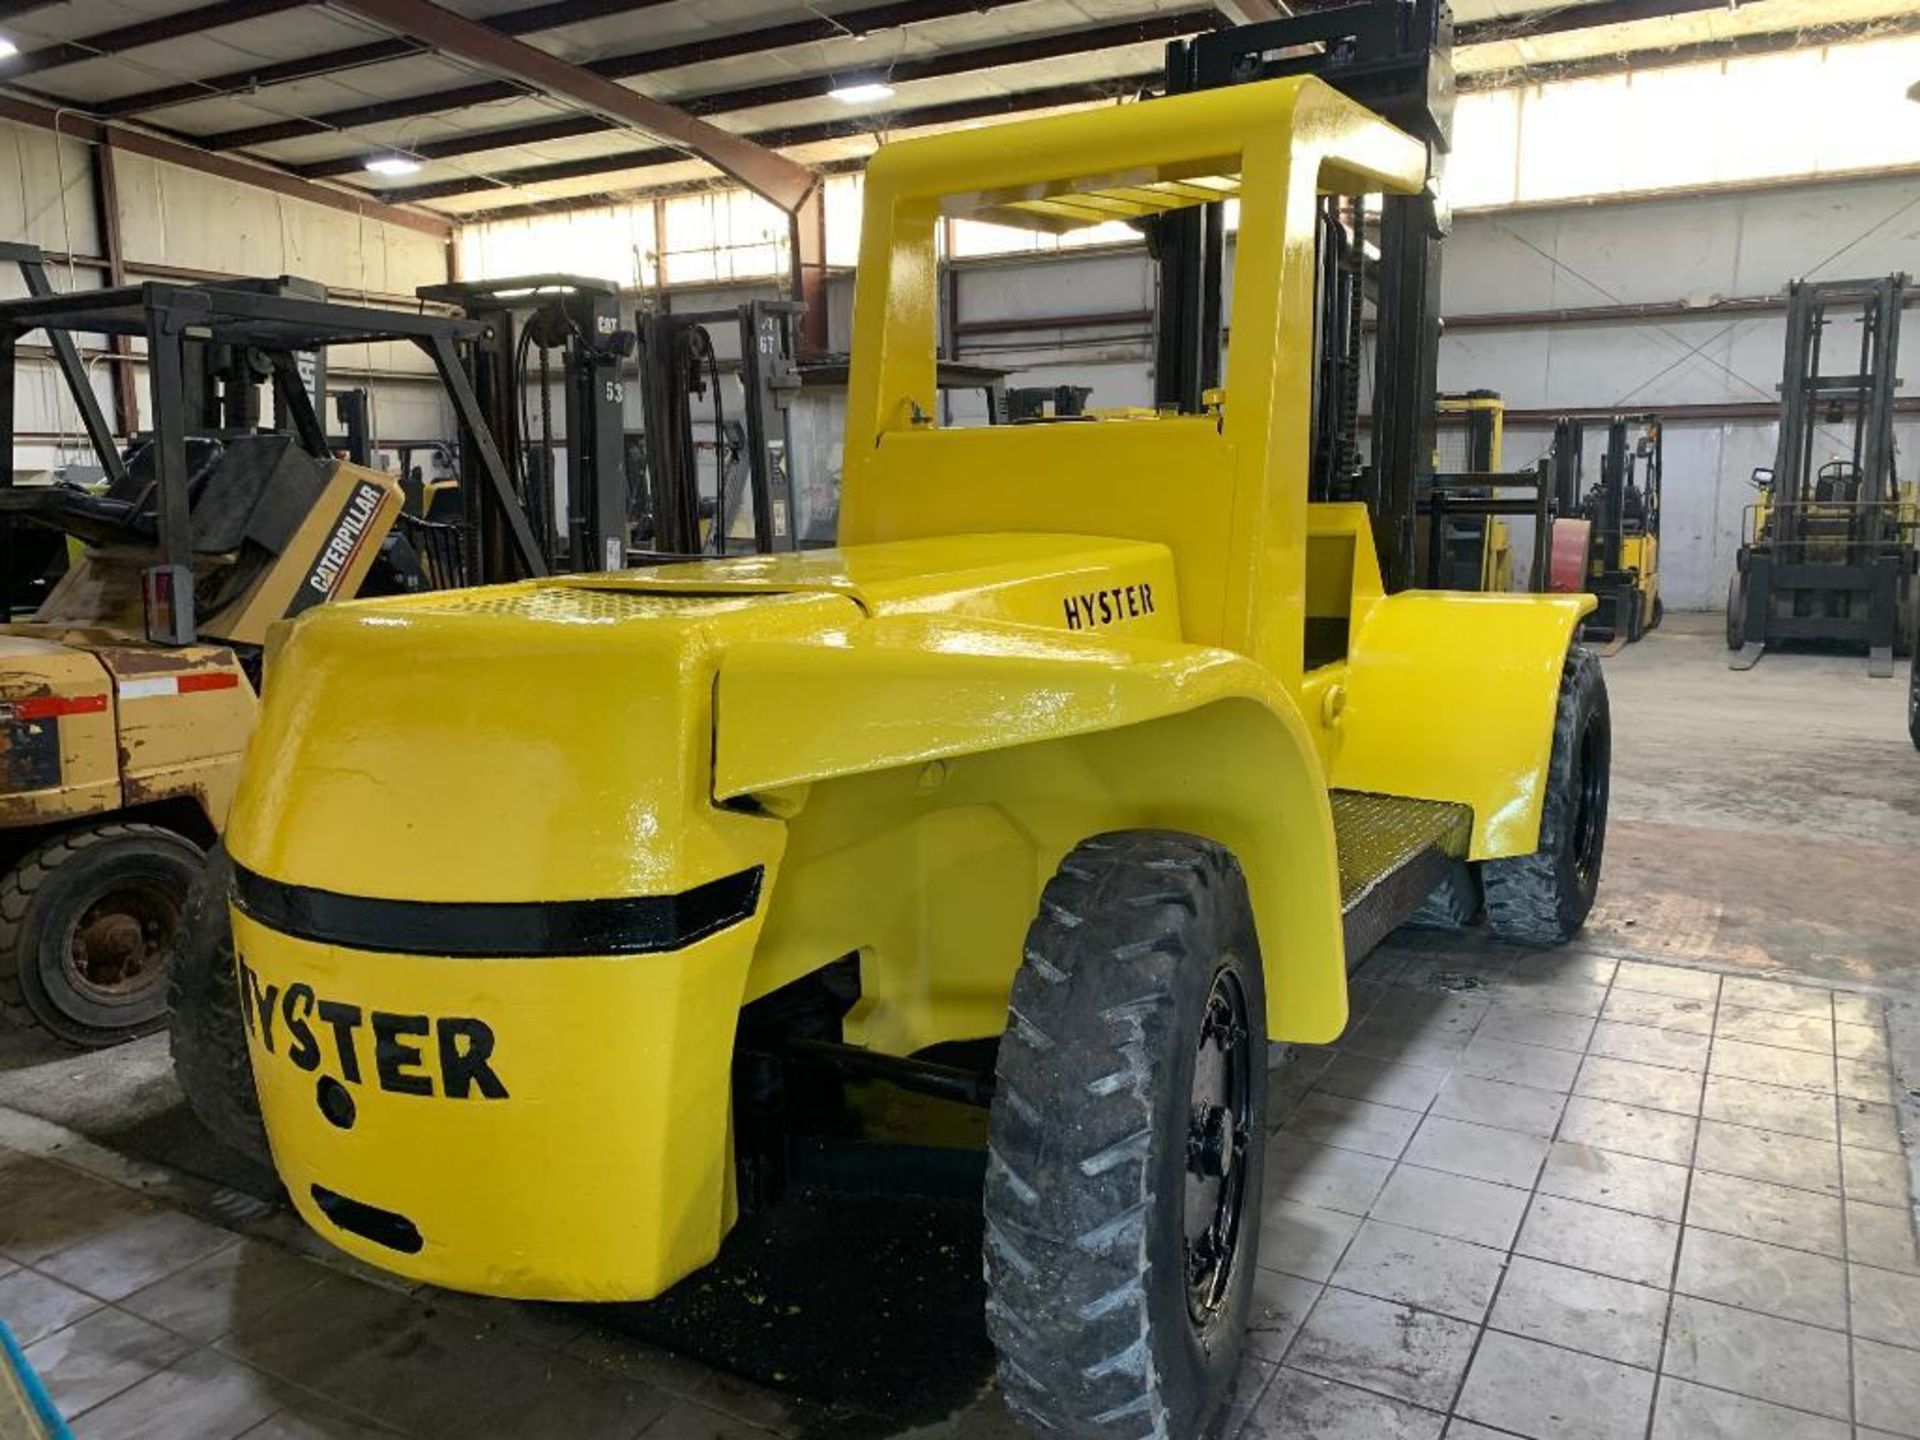 Hyster 30,000 lb. capacity forklift, model h300, s/n a19p1666k, gasoline, oil clutch, dual drive pne - Image 3 of 5